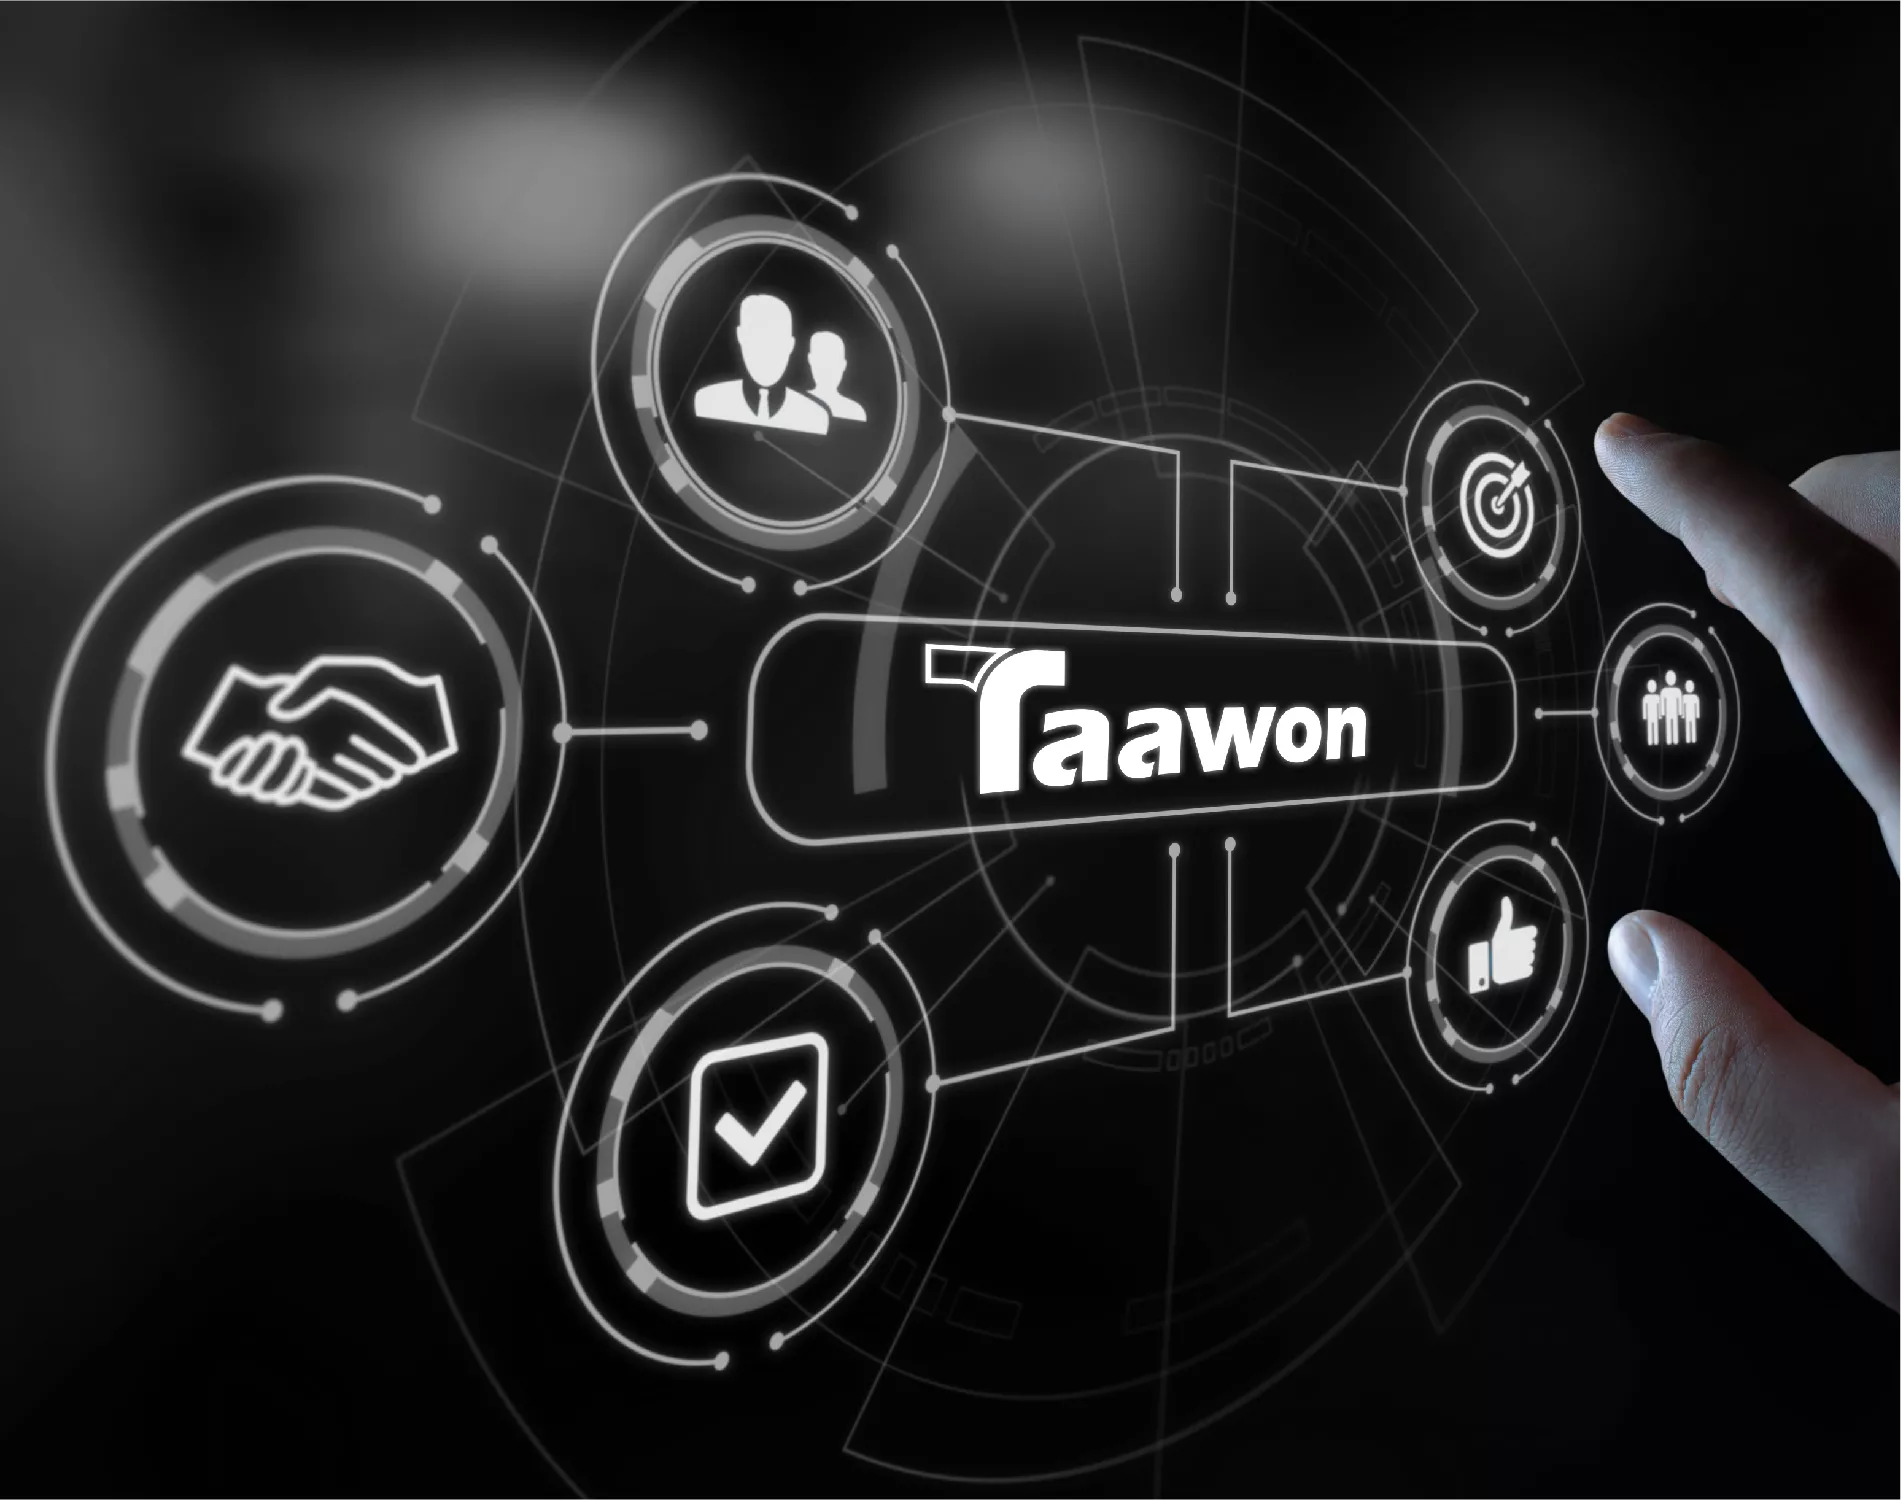 Taawon Group | Our Values